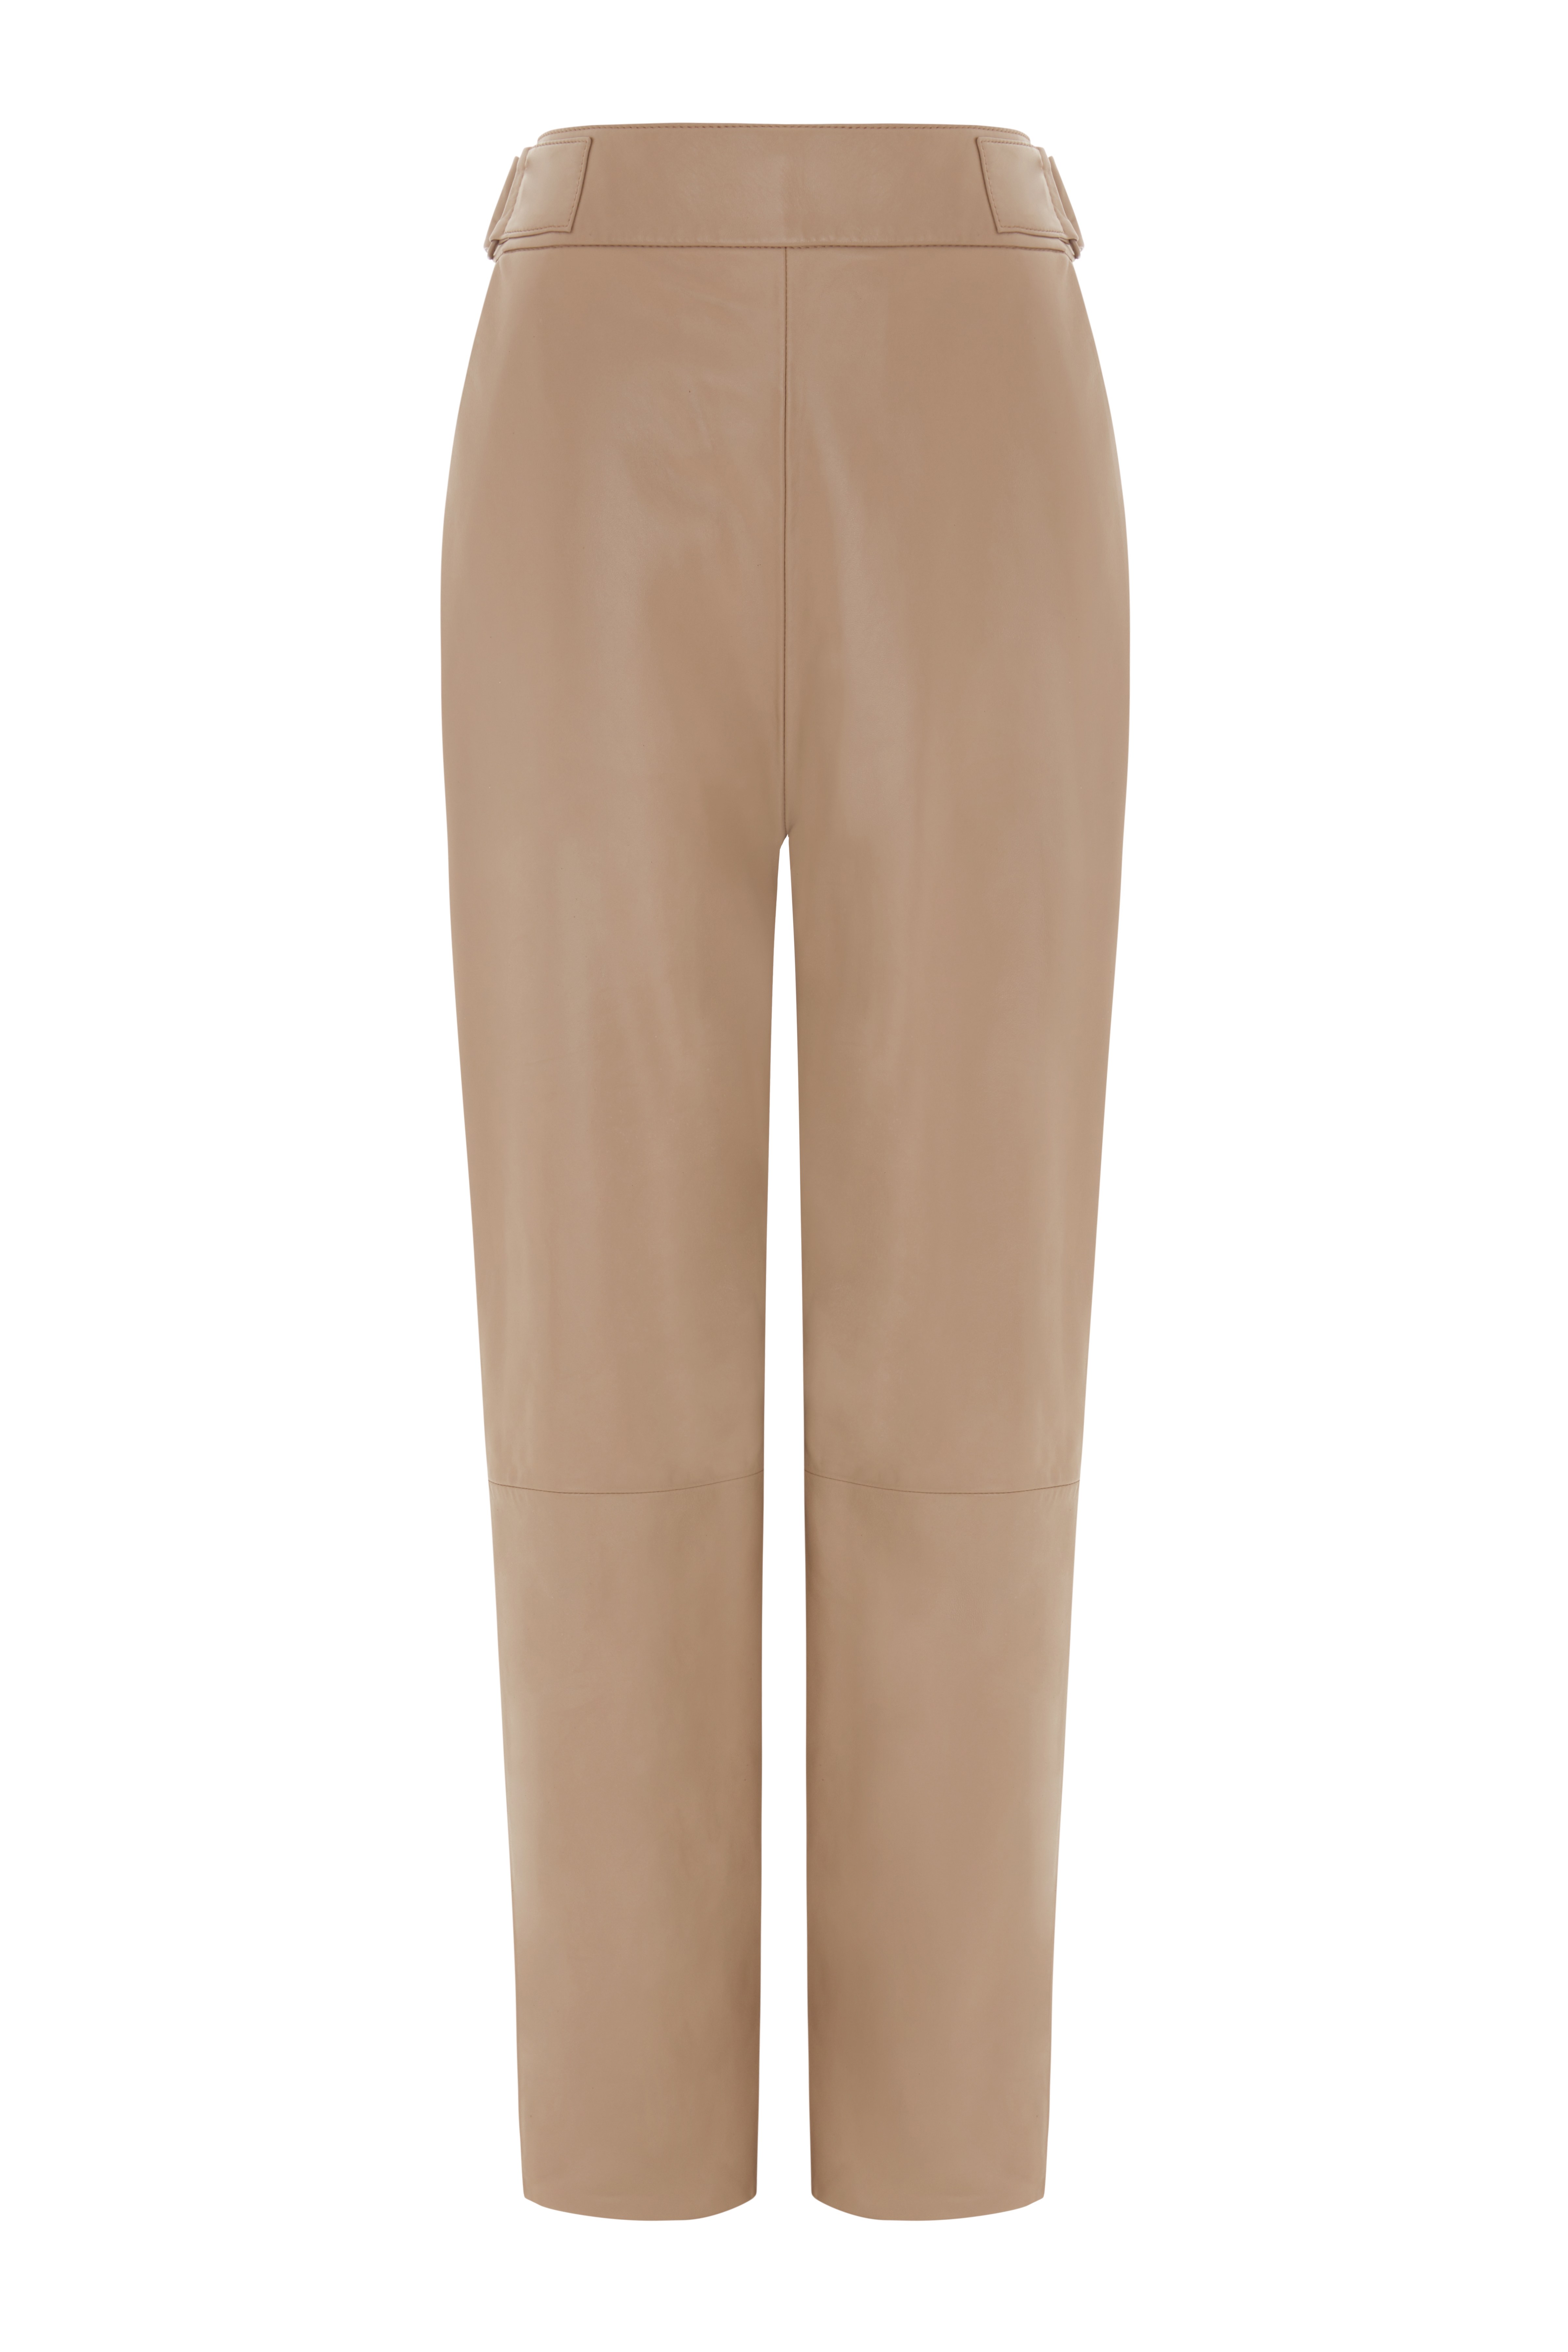 Whistles Adrianna Leather Trousers